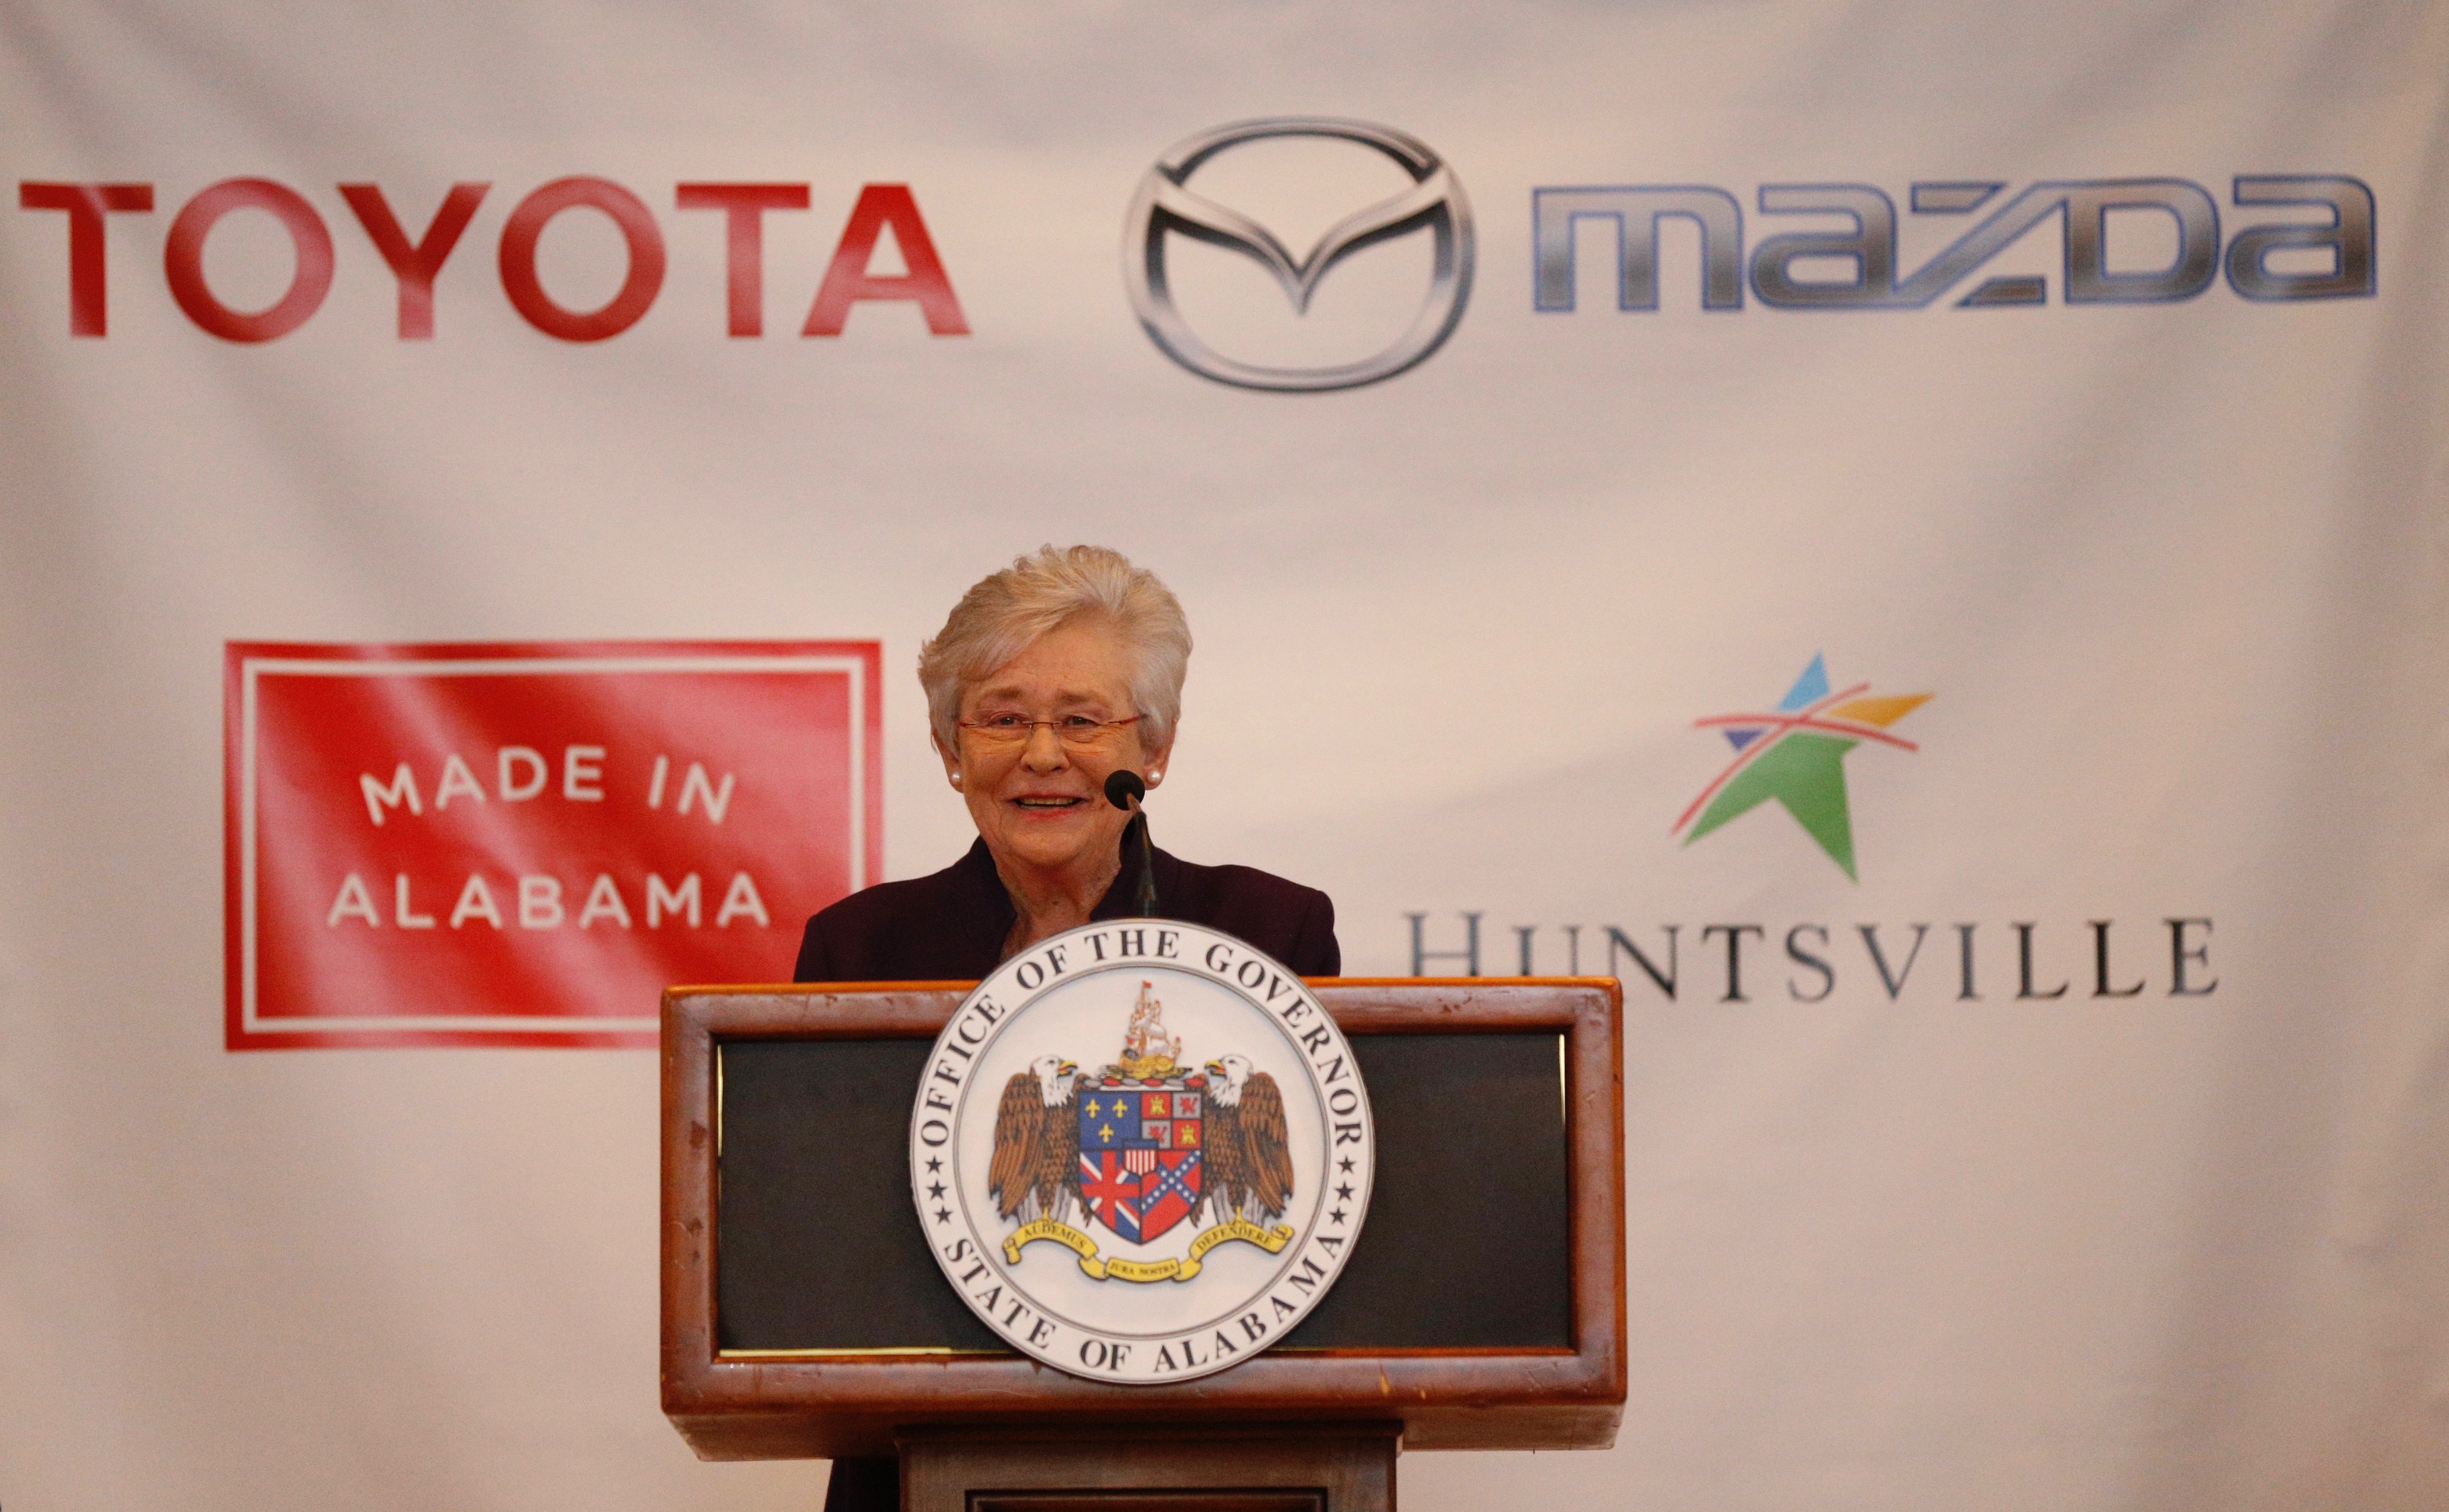 Toyota-Mazda selects Alabama for $1.6 billion auto plant with 4,000 jobs